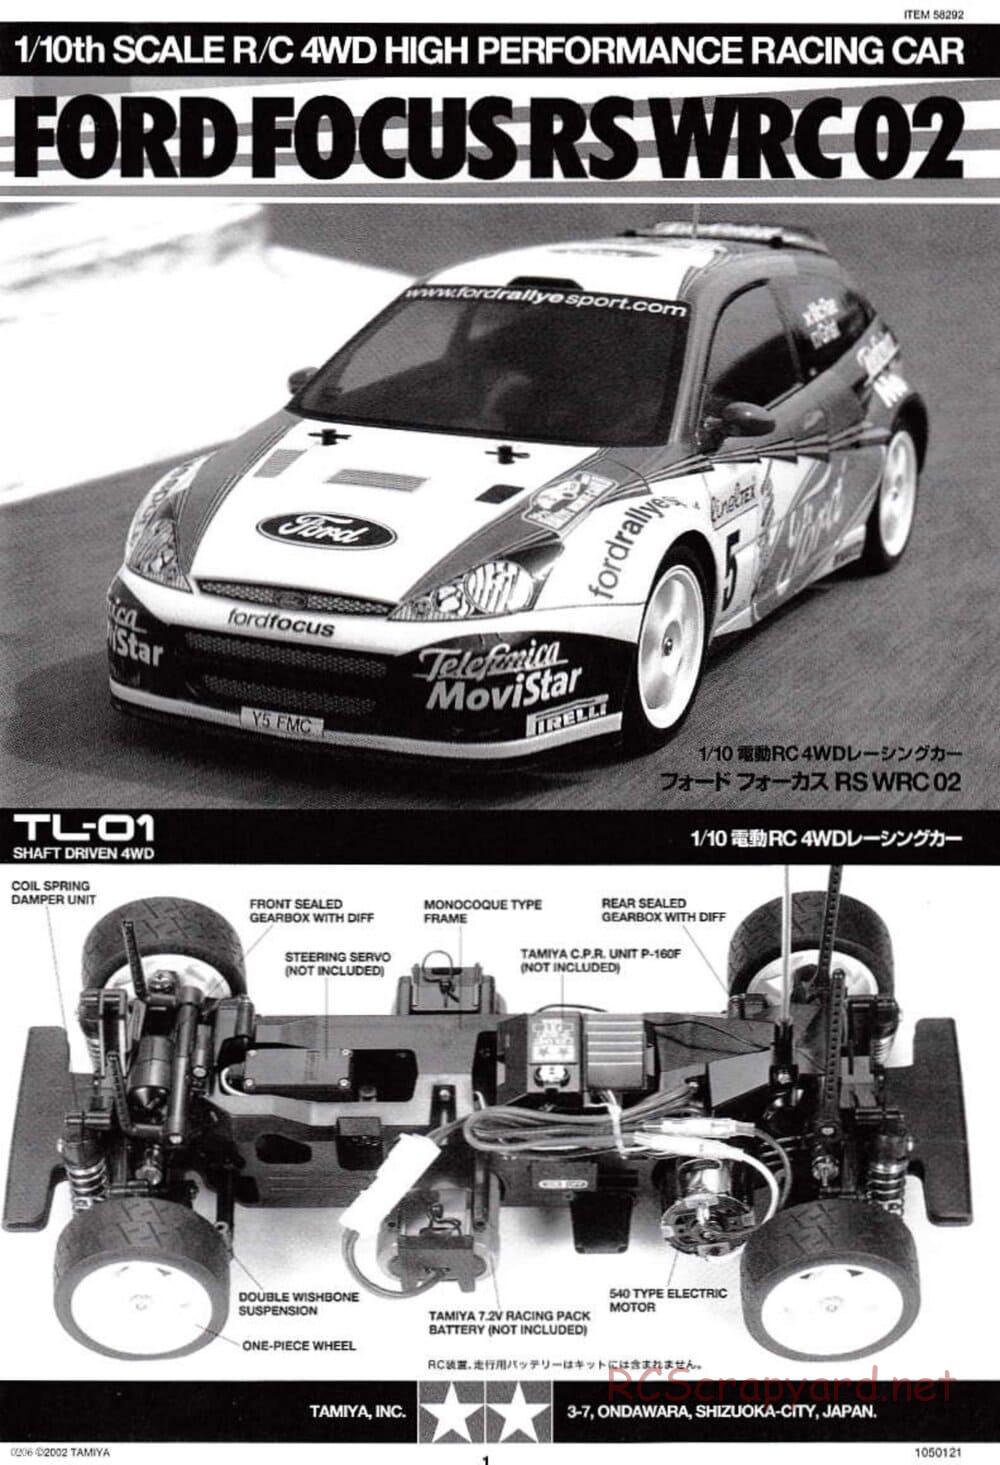 Tamiya - Ford Focus RS WRC 02 - TL-01 Chassis - Manual - Page 1